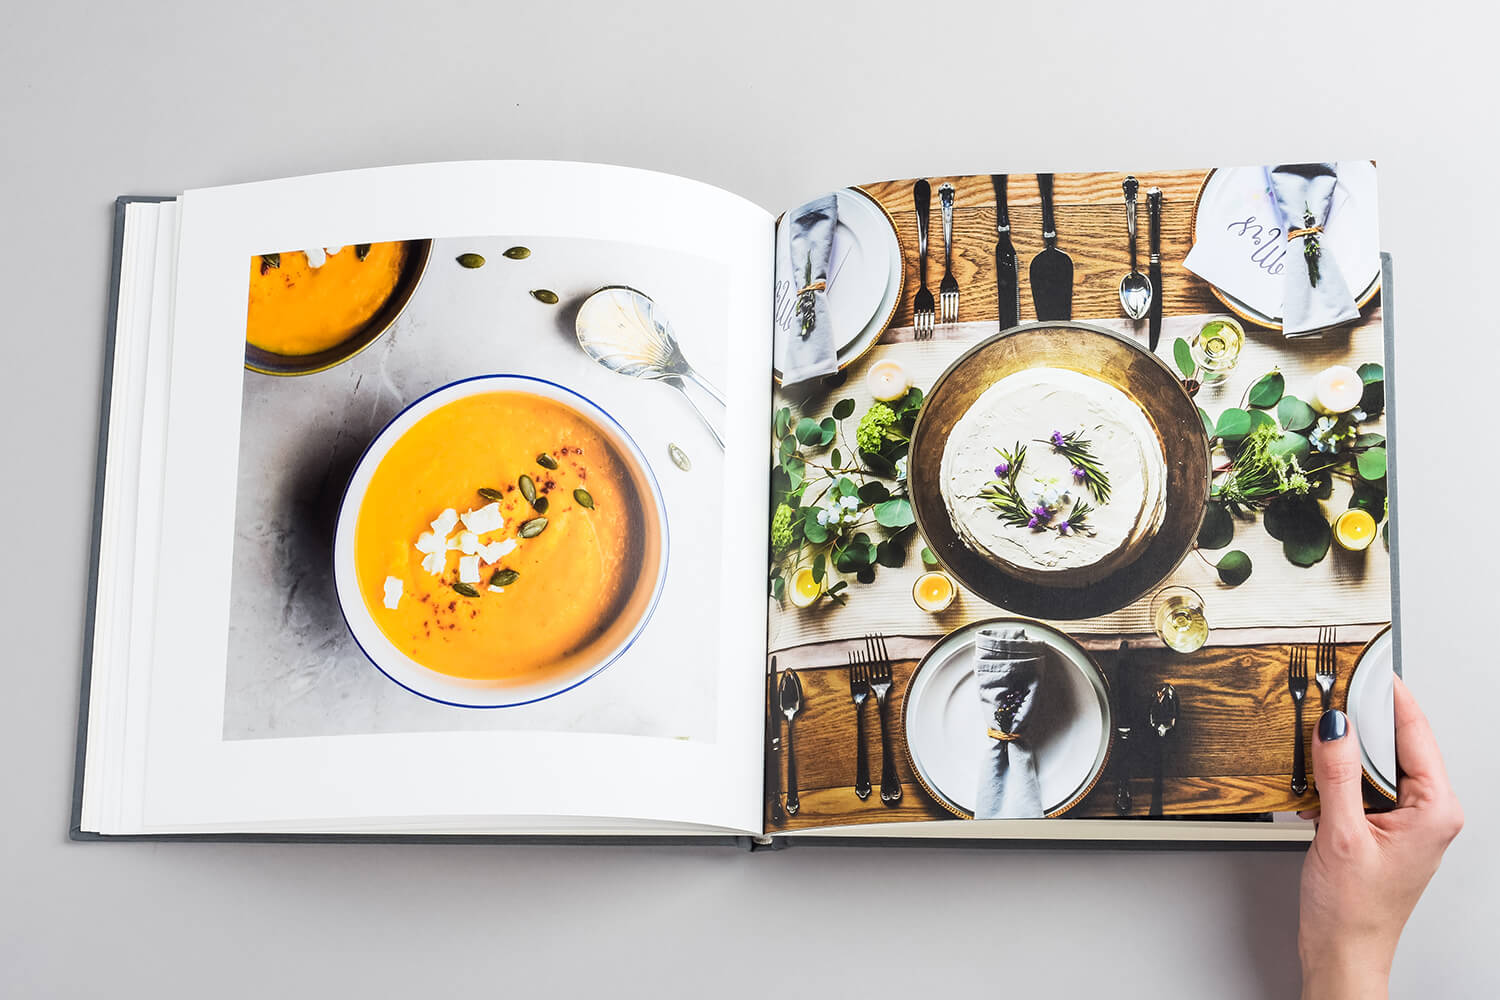 A recipe with your recipes in an ArtiBook photo book